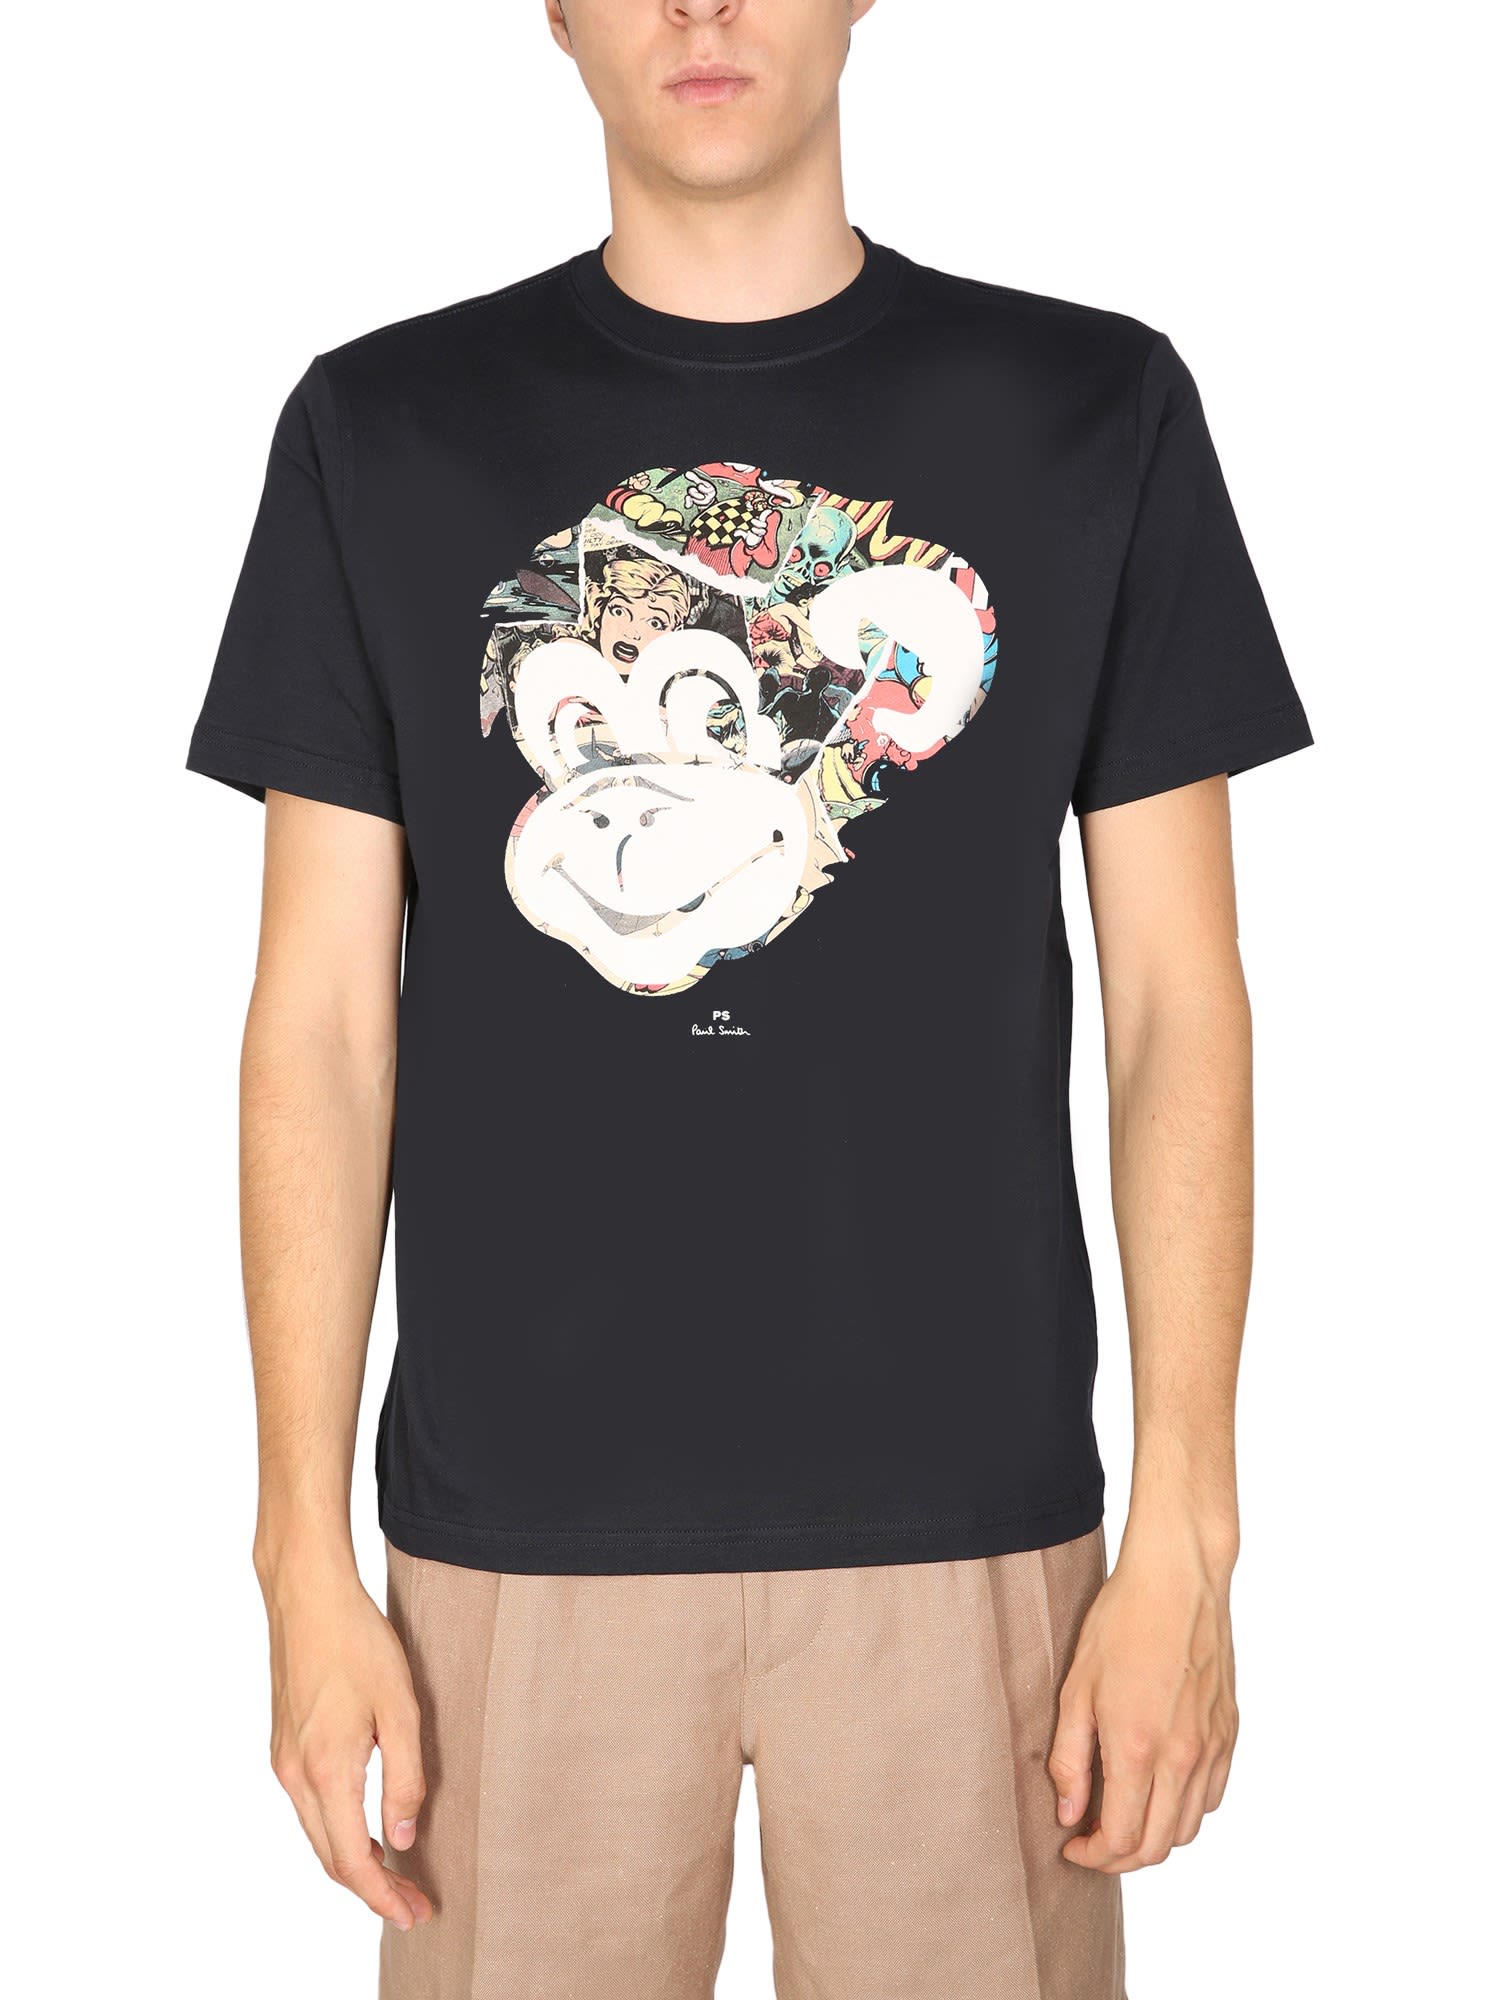 PS by Paul Smith Monkey T-shirt